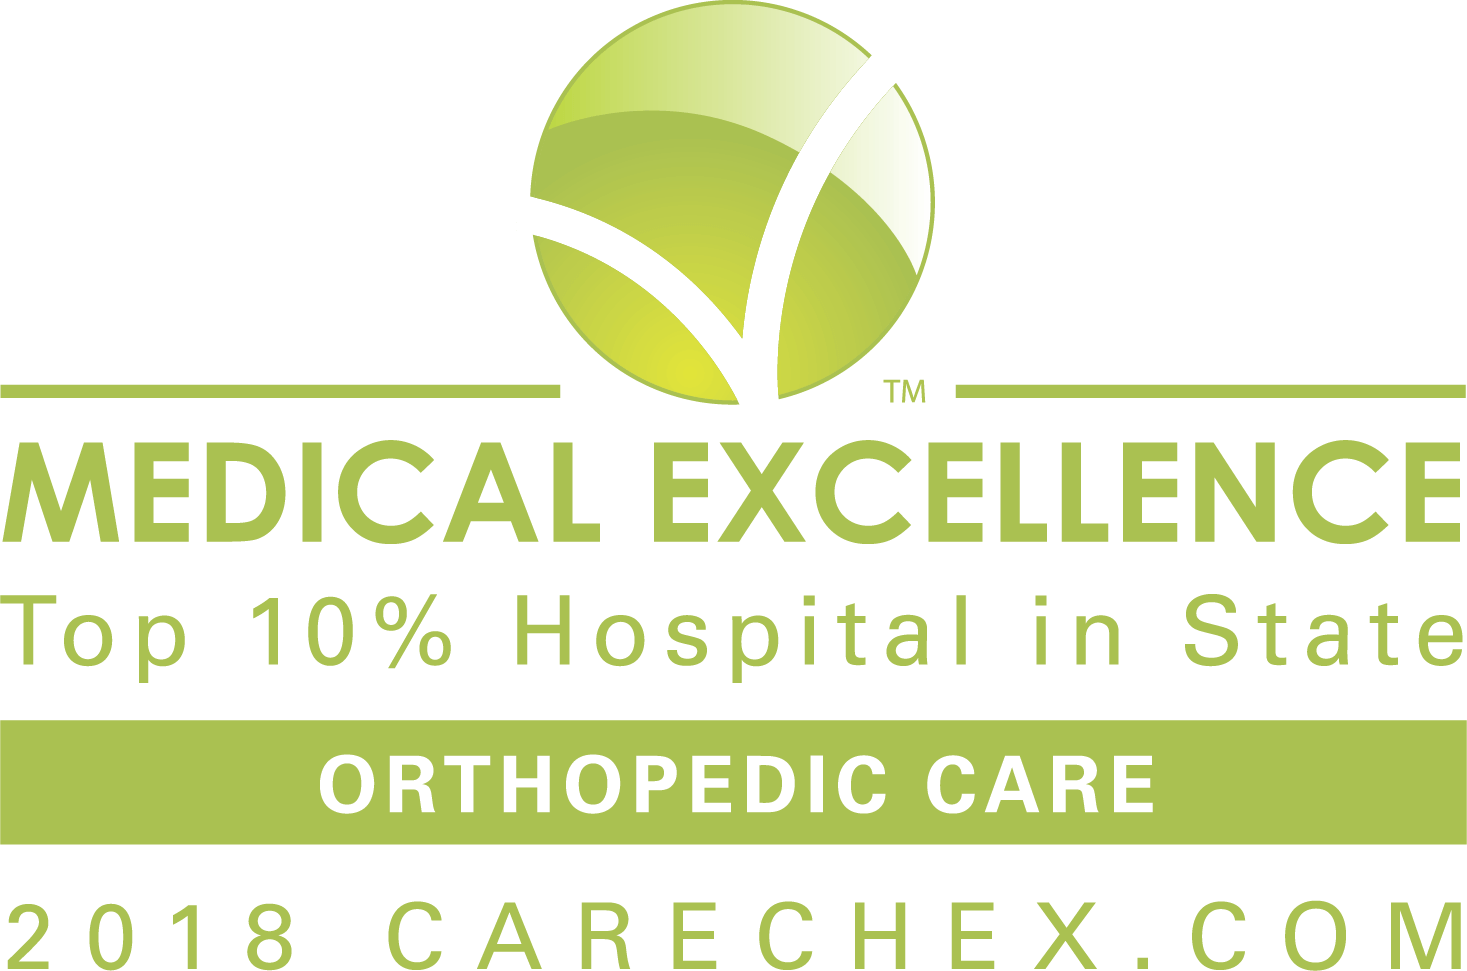 Williamson Medical Center 2018 CareChex Award - Top 10% of Hospitals in State for Medical Excellence Orthopedic care.